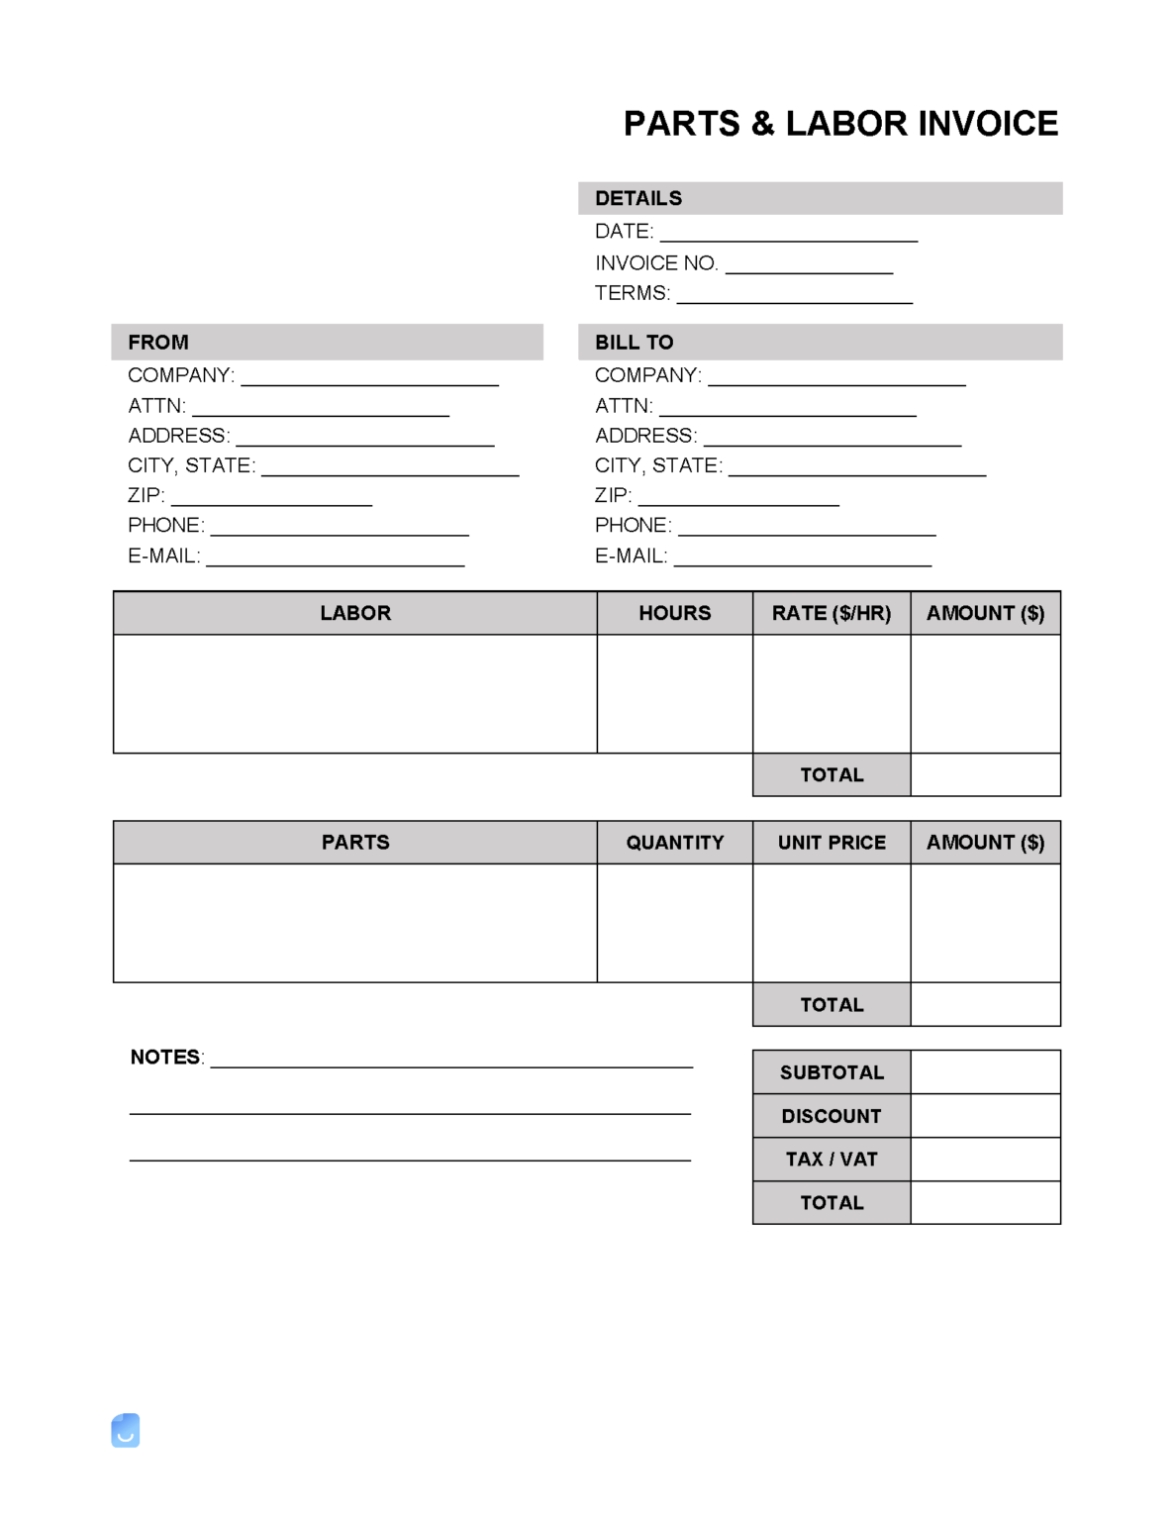 Parts And Labor Invoice Template With Parts And Labor Invoice Template Free